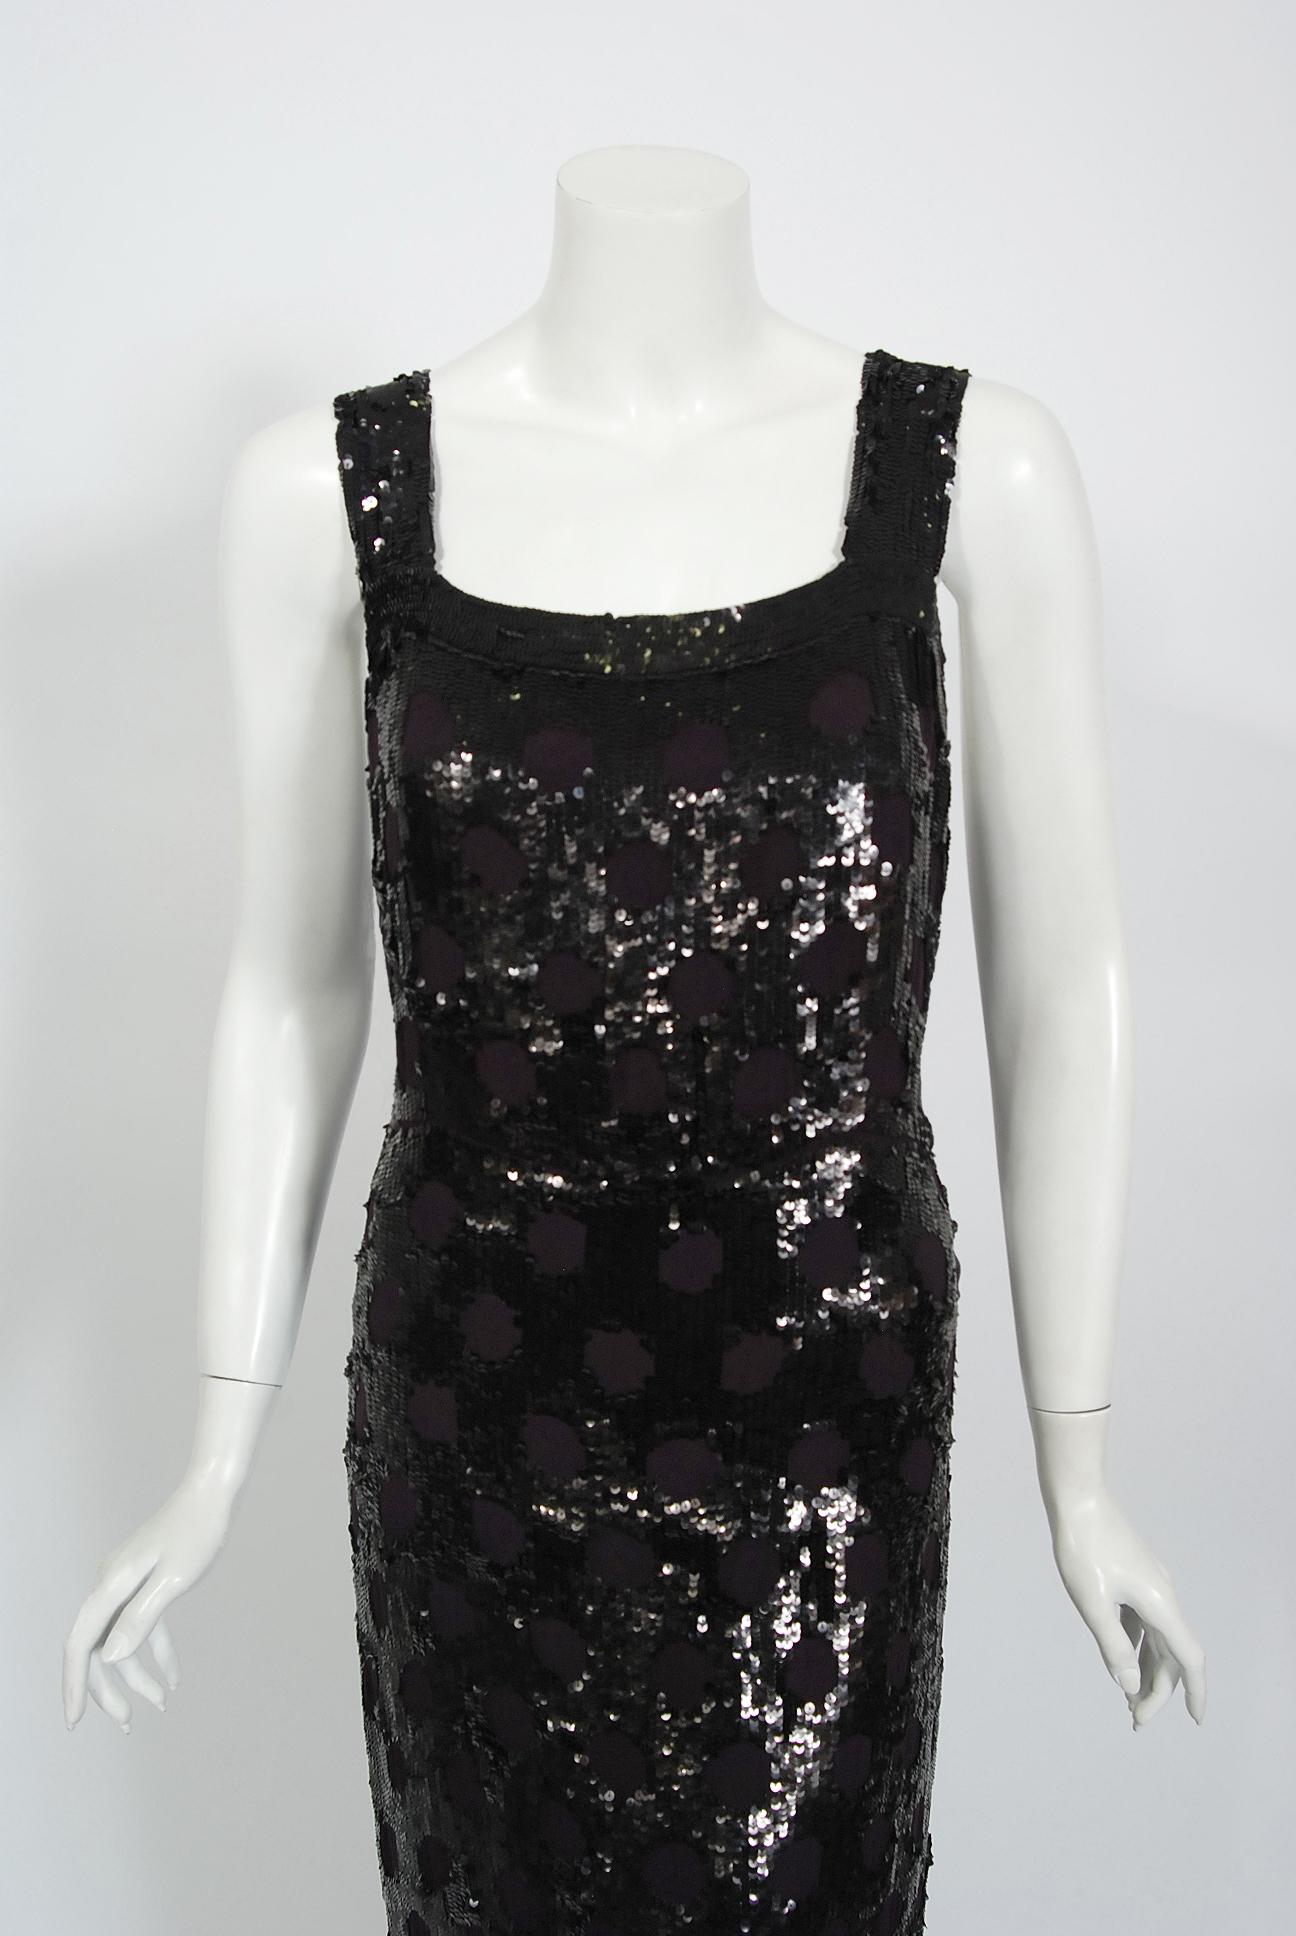 Sparkling gowns from the 1930's era are perennial favorites and this one is breathtaking. Henri Bendel, established in 1895, was an American upscale women's specialty store based in New York City that sold high-end couture fashion. Henri Bendel was